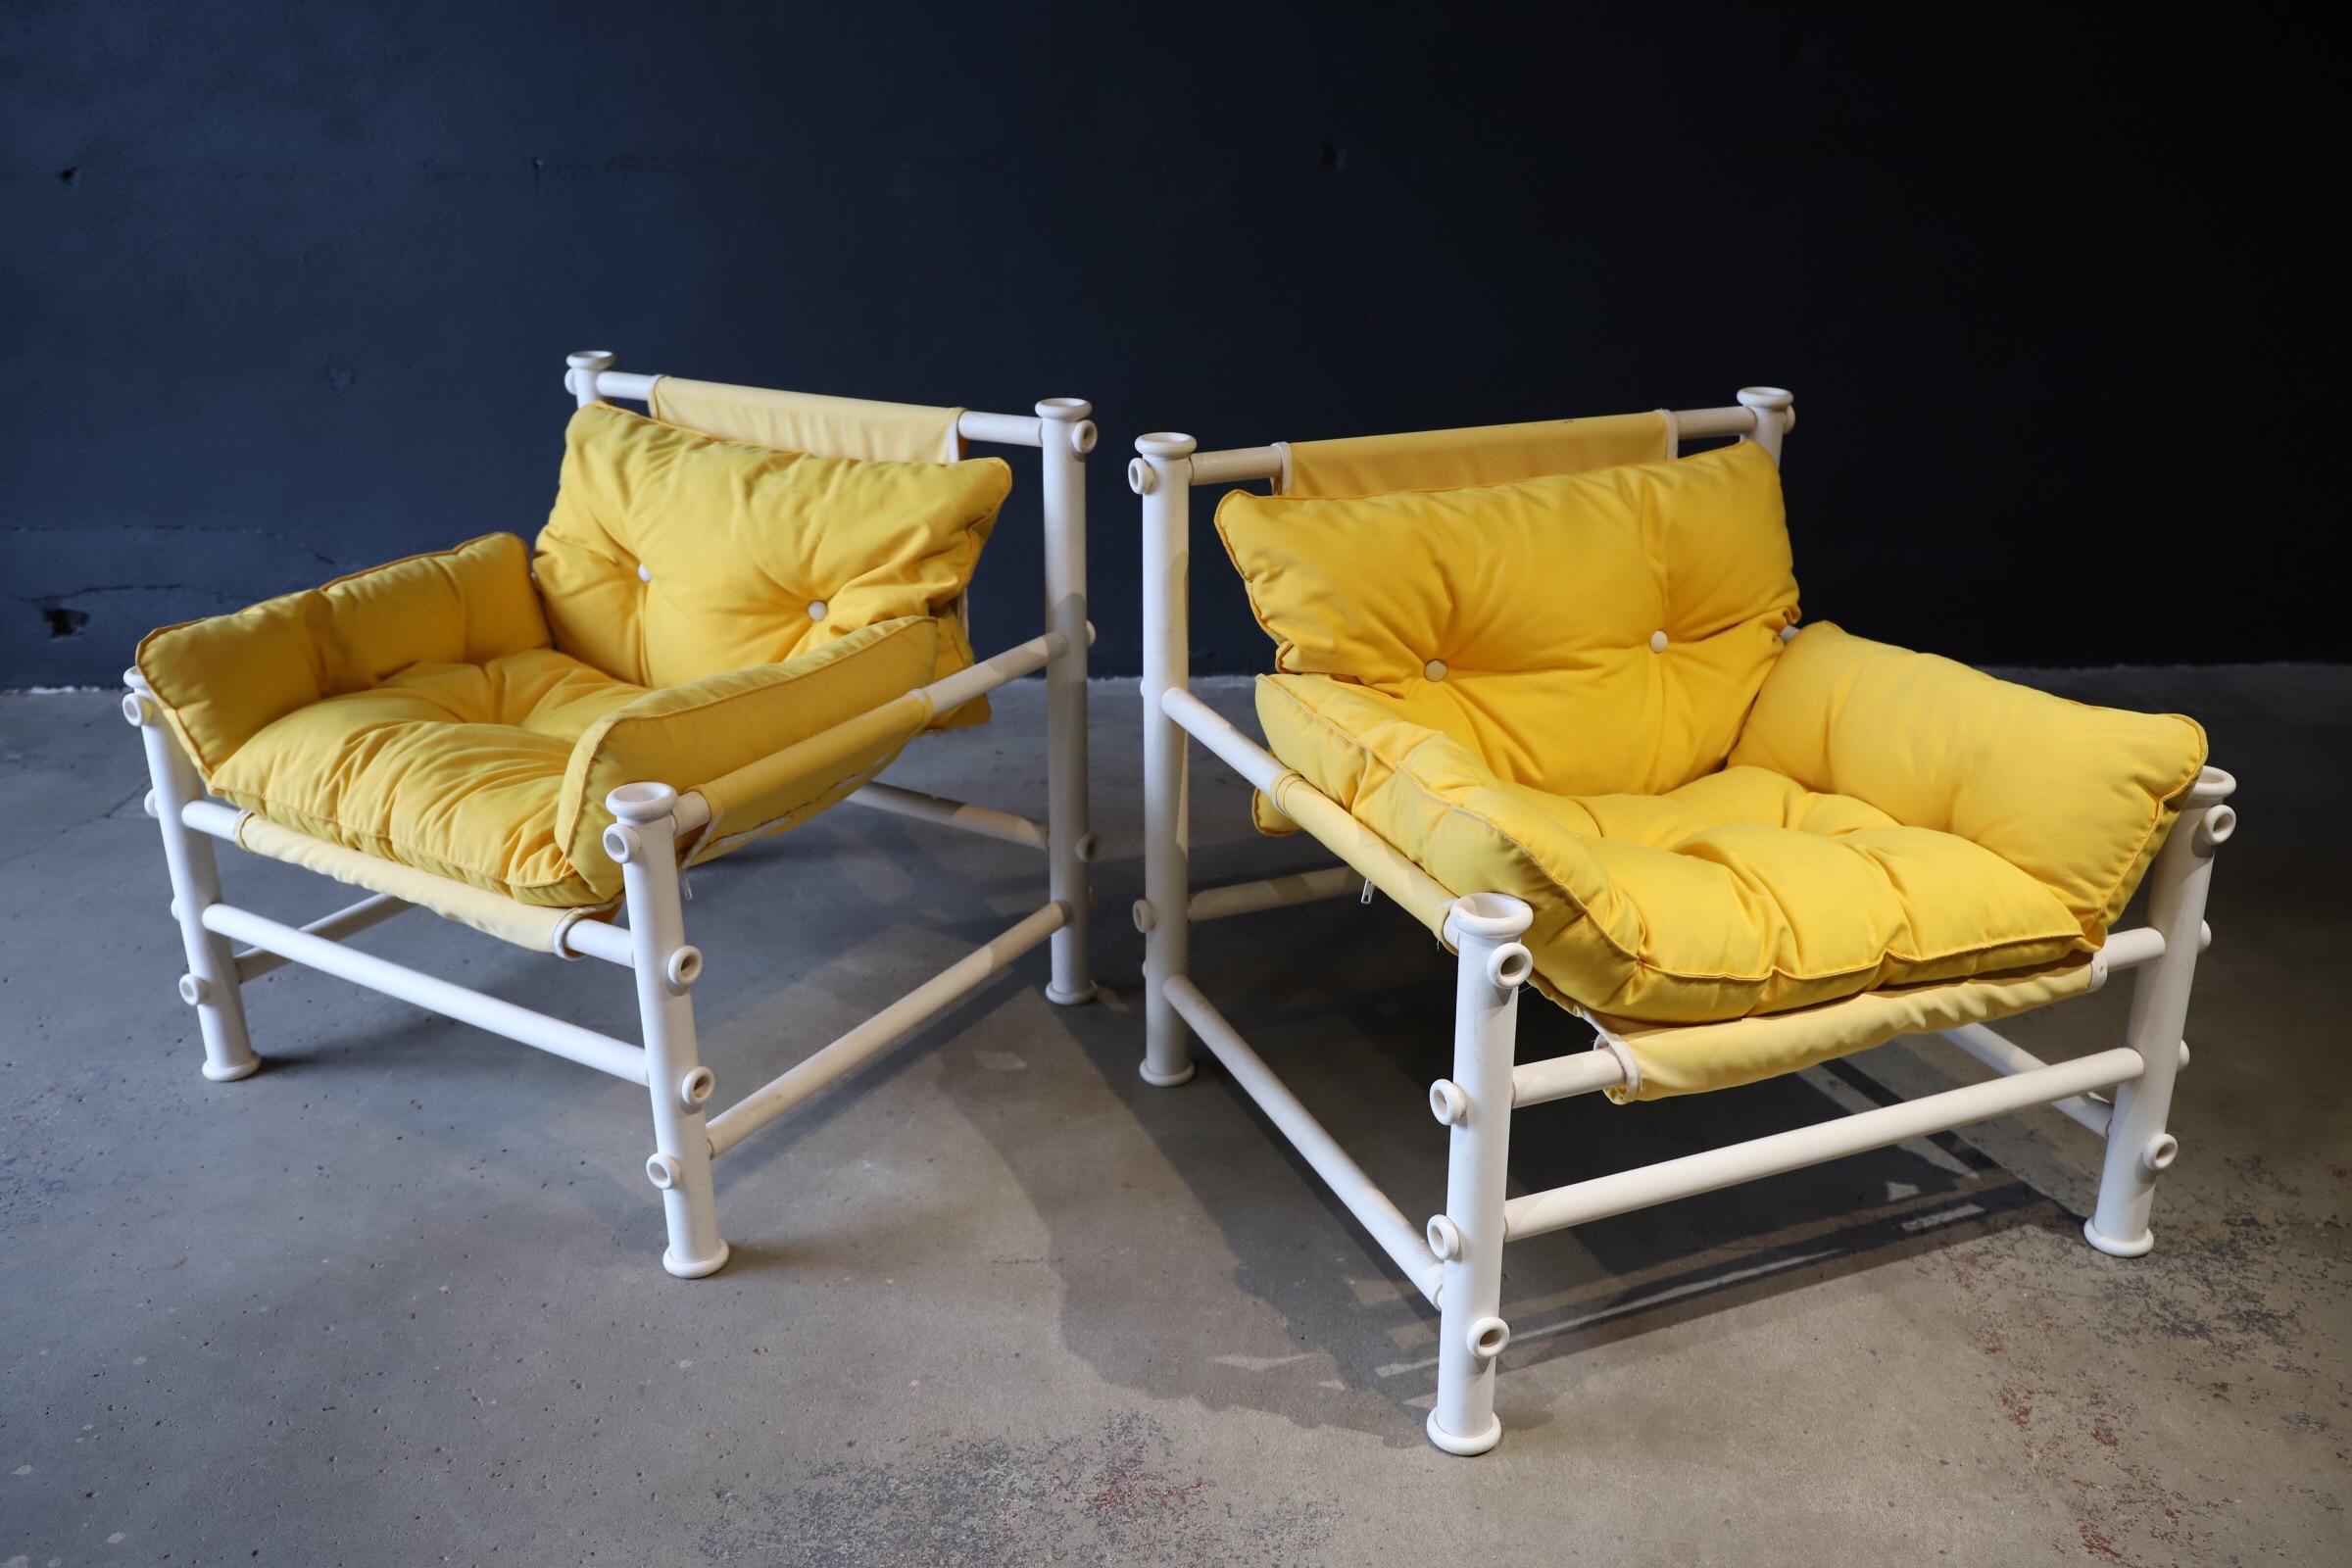 Super fun, bright yellow outdoor lounge chairs designed by Jerry Johnson for Landes Manufacturing Co. Chairs were not produced in massive quantities, so tend to be rarely sold/seen/found. PVC chair frame with detachable padded outdoor Sunbrella